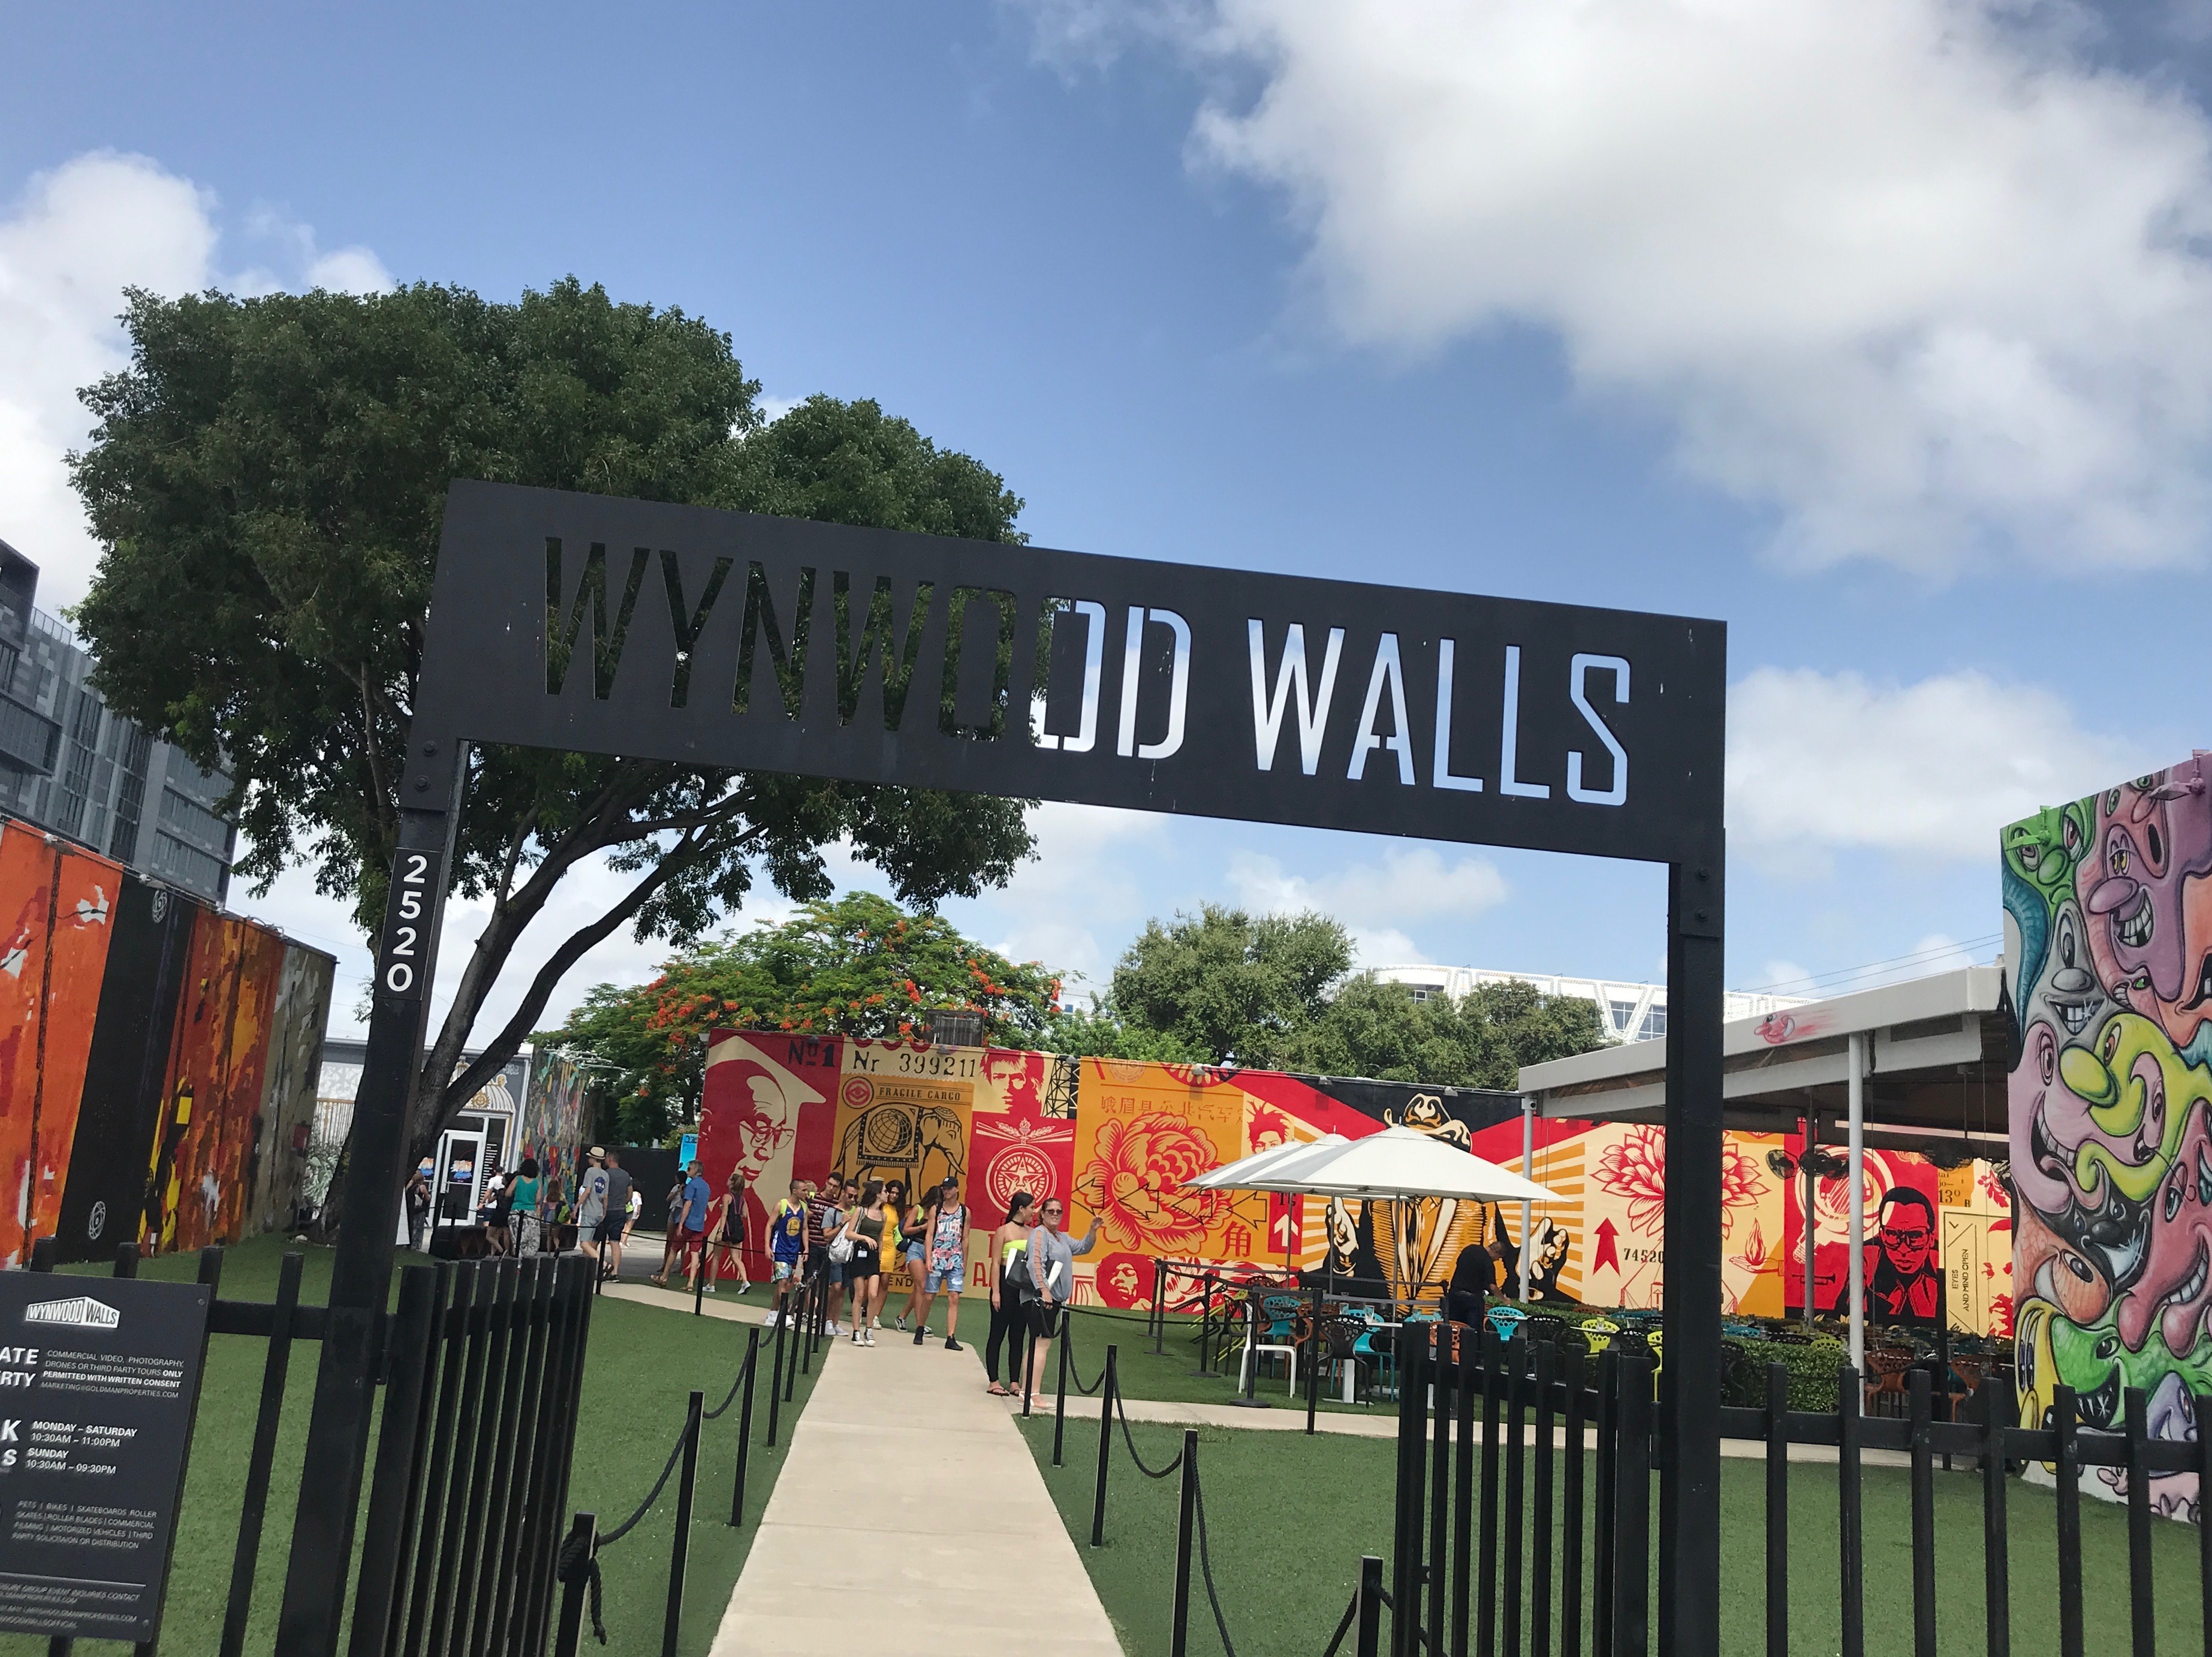 A complimentary weekend in Miami, I visited Wynwood Walls Murals